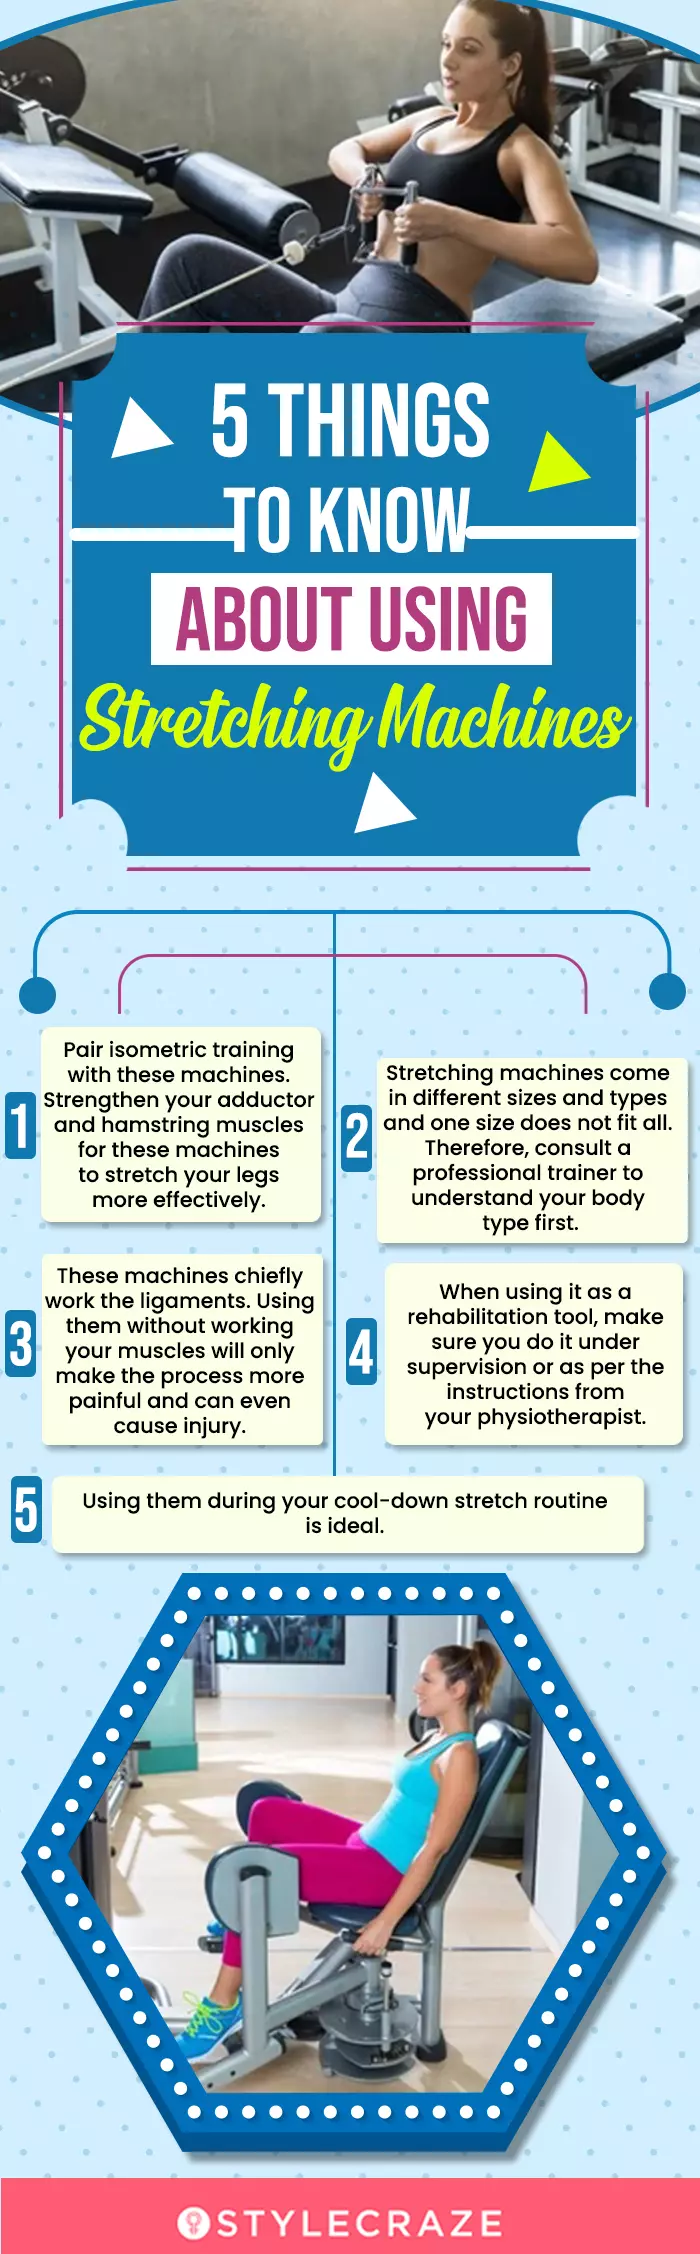 5 Things To Know About Using Stretching Machines (infographic)